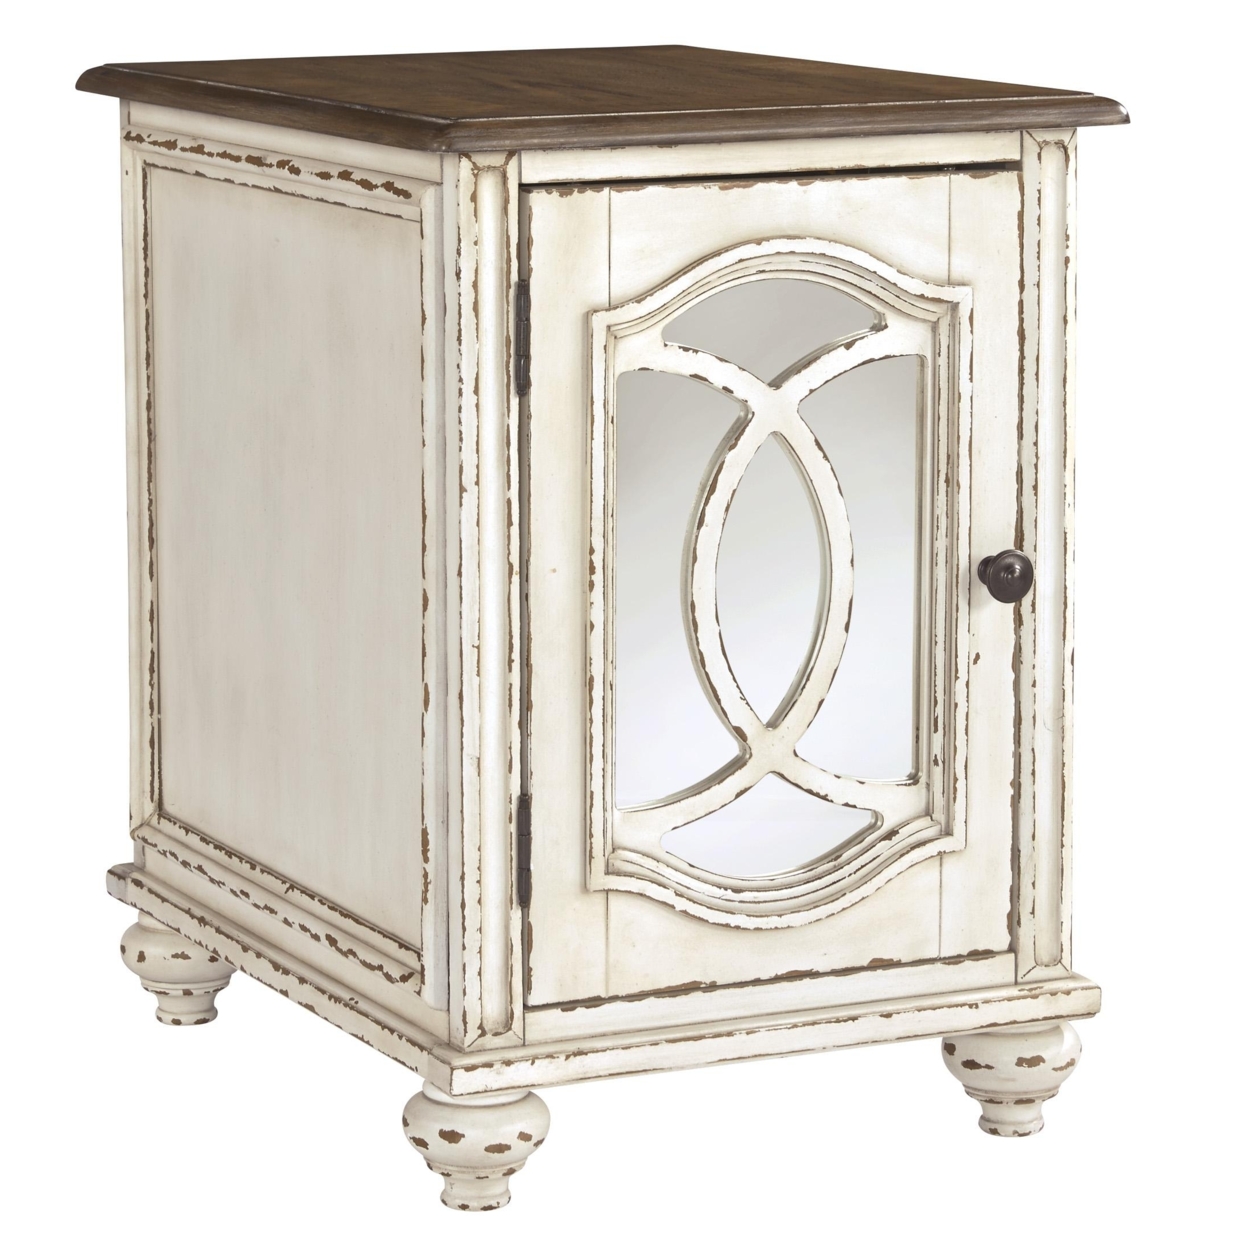 Two Tone Chair Side End Table With Mirror Insert Cabinet, White And Brown- Saltoro Sherpi